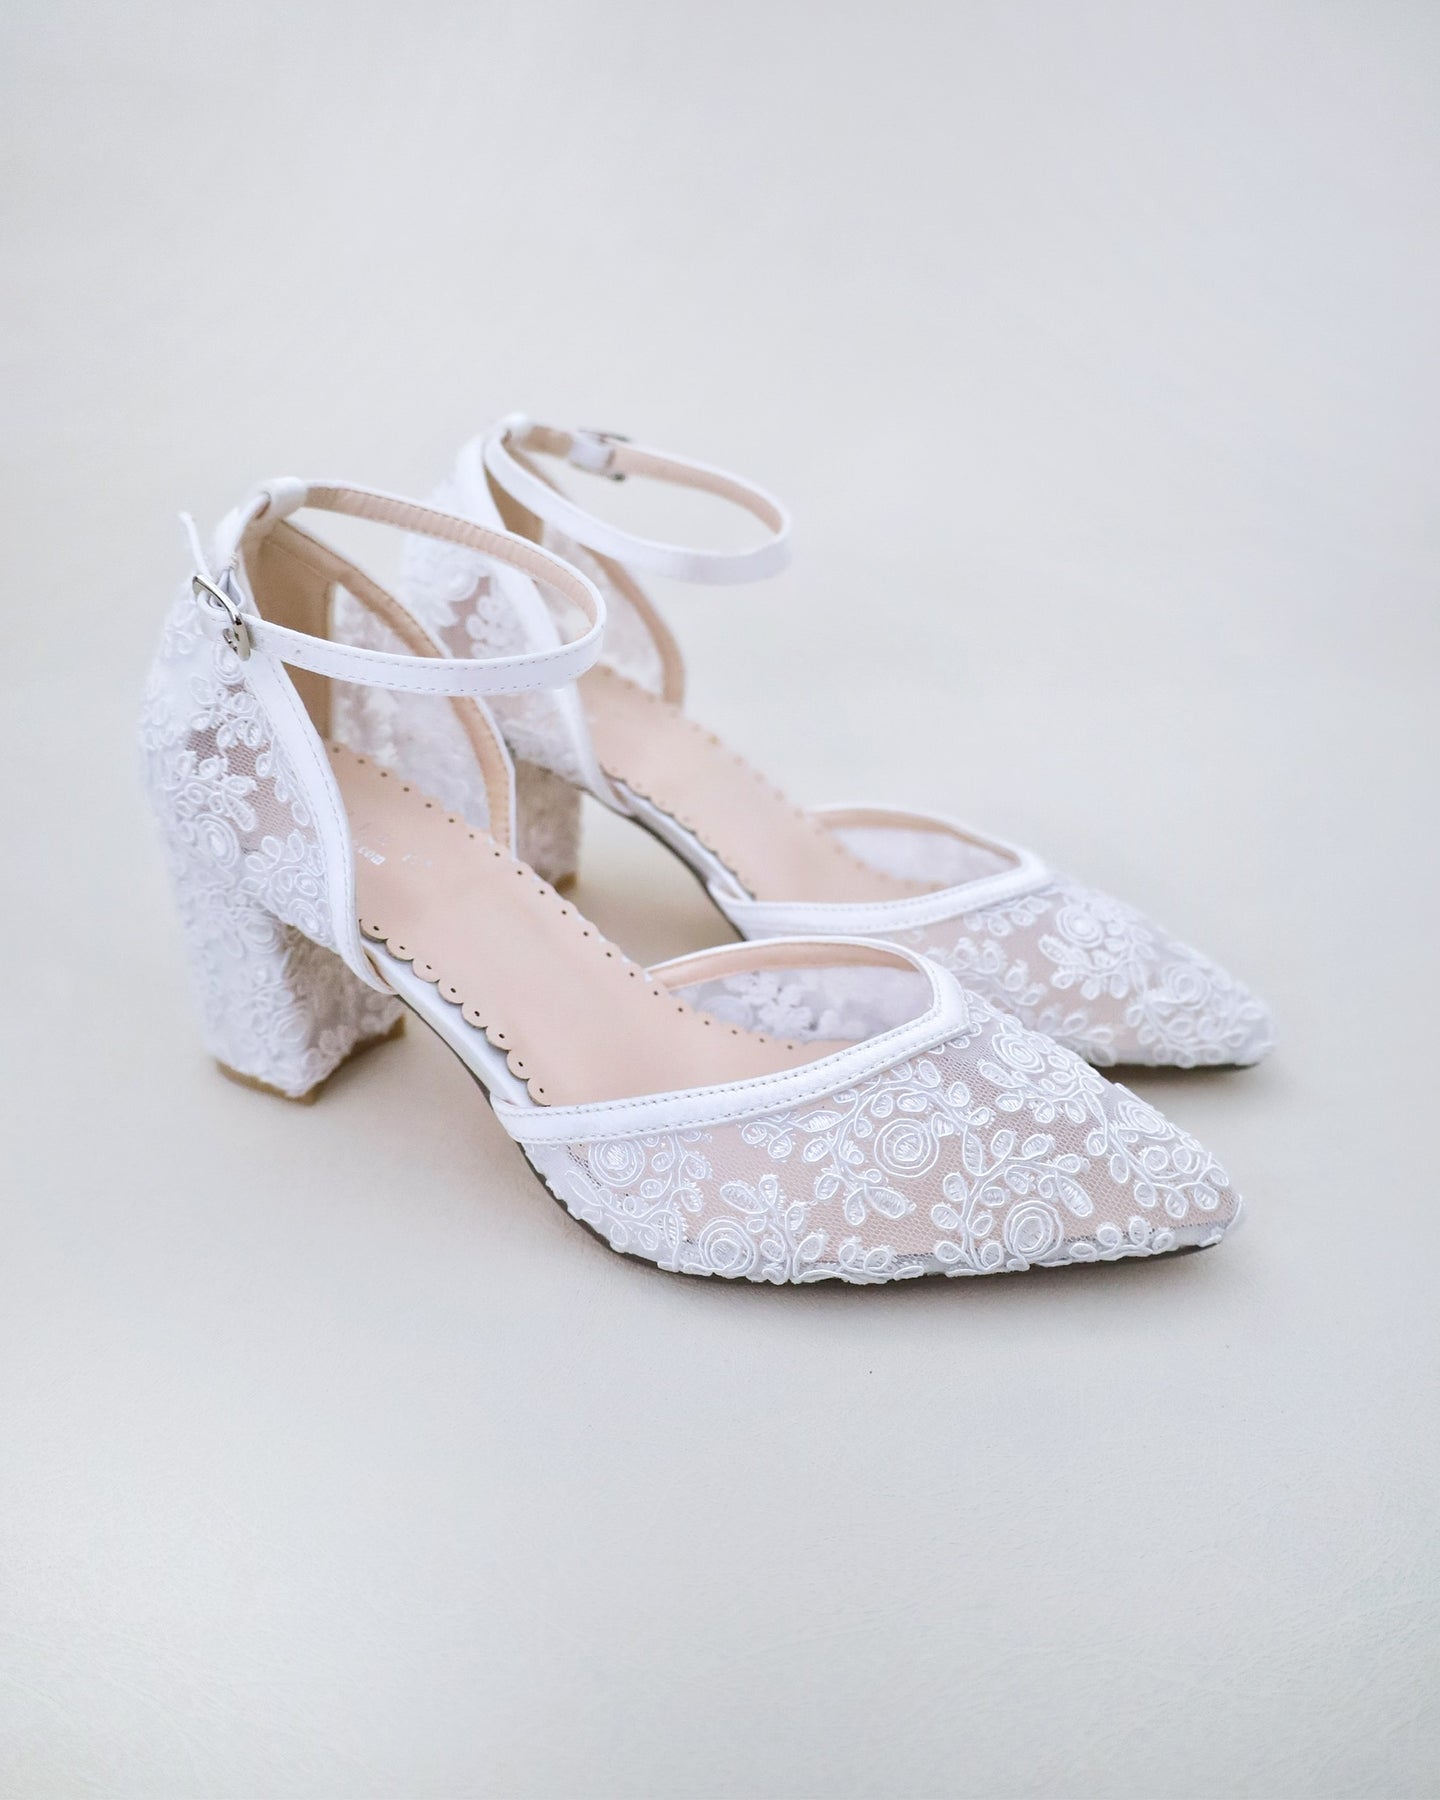 Monara - Lulus Search | Lace up high heels, White strappy heels, Lace heels